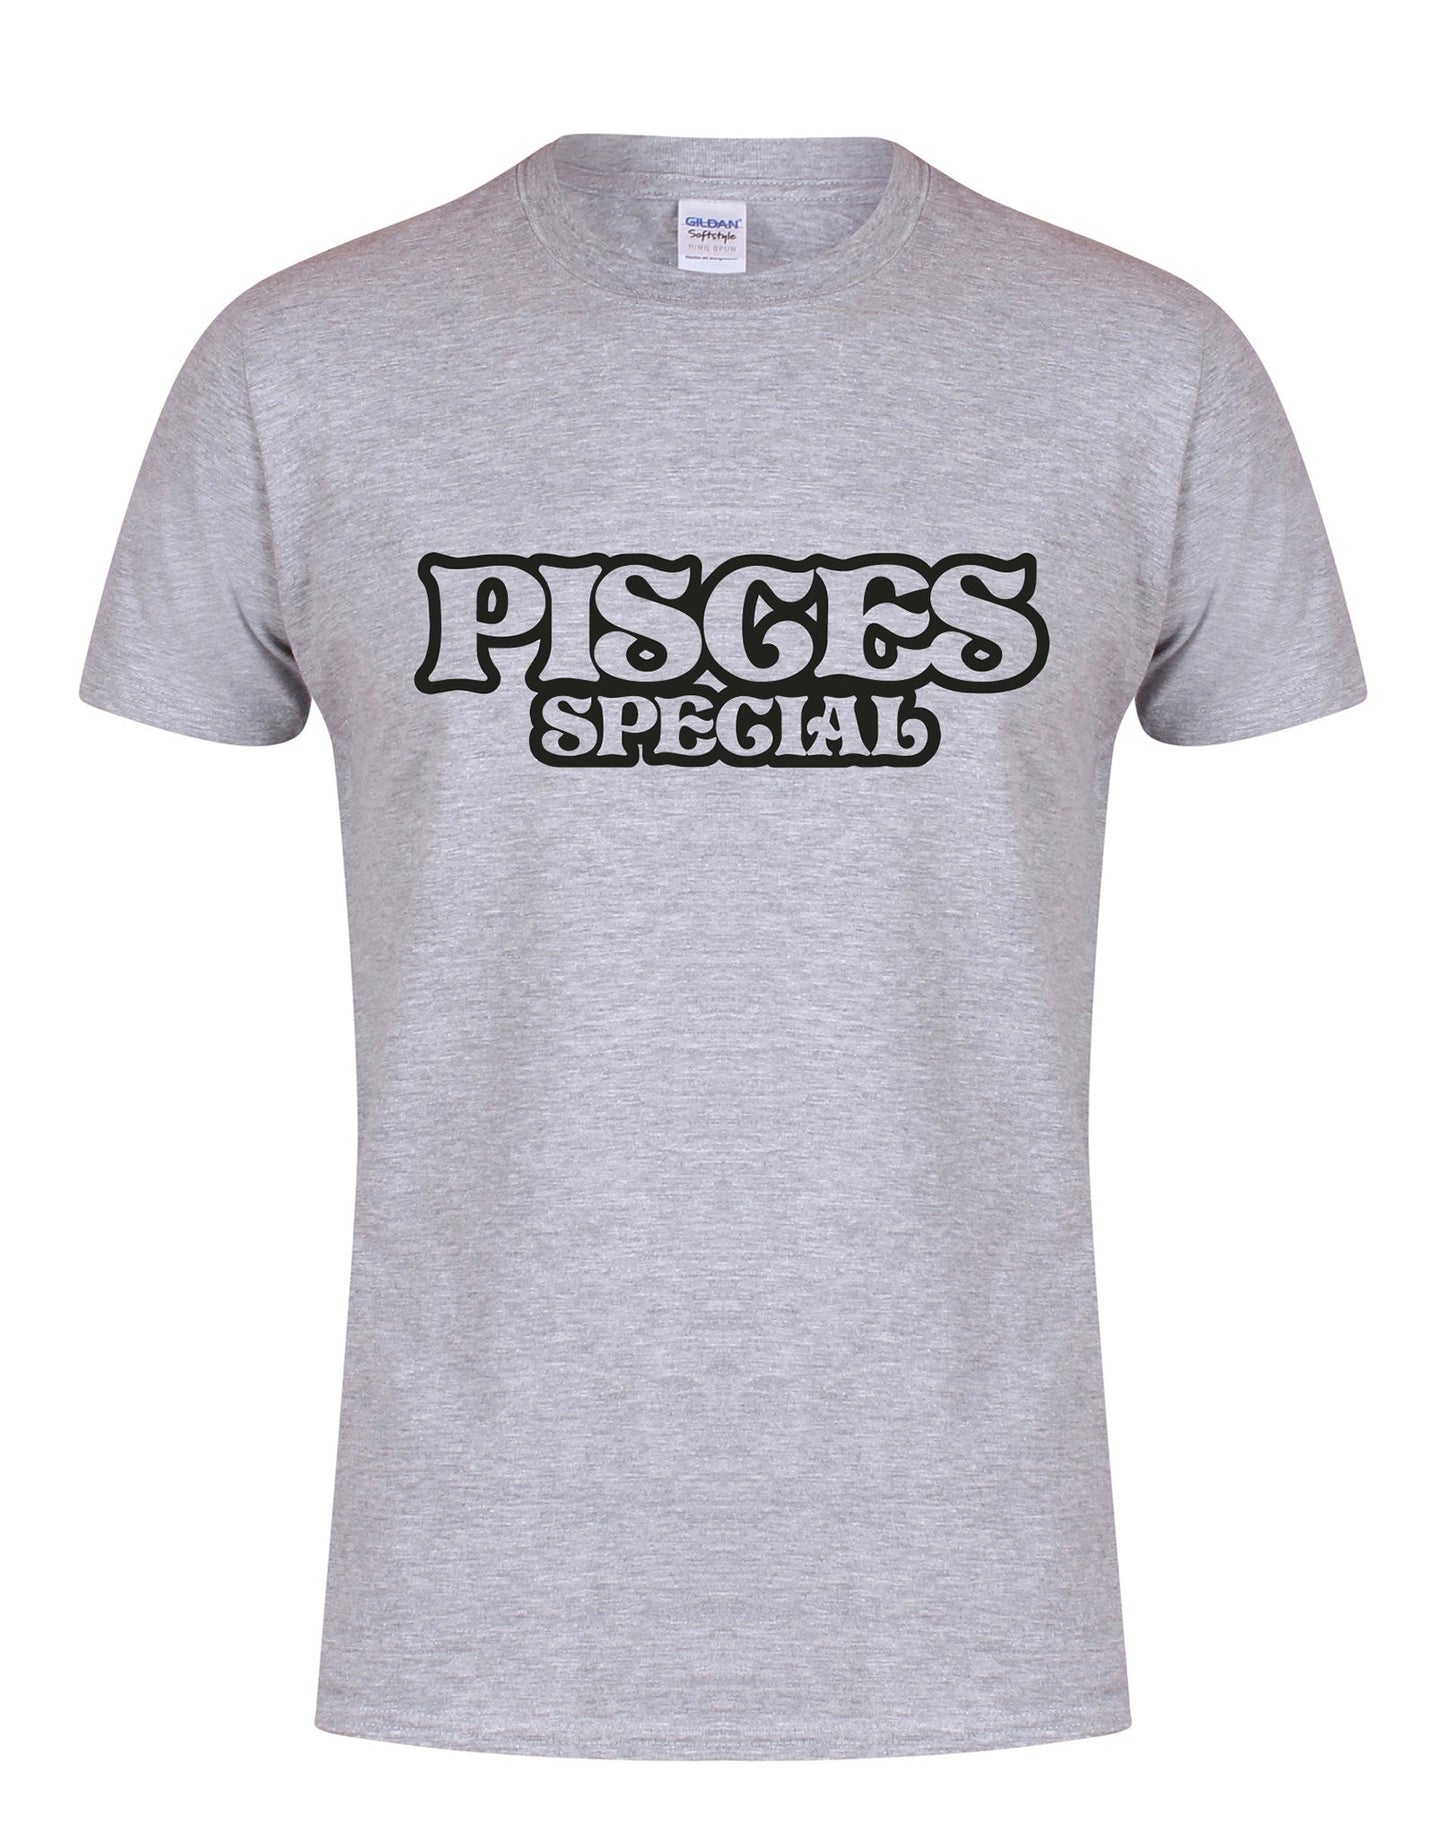 Pisces Special unisex fit T-shirt - various colours - Dirty Stop Outs